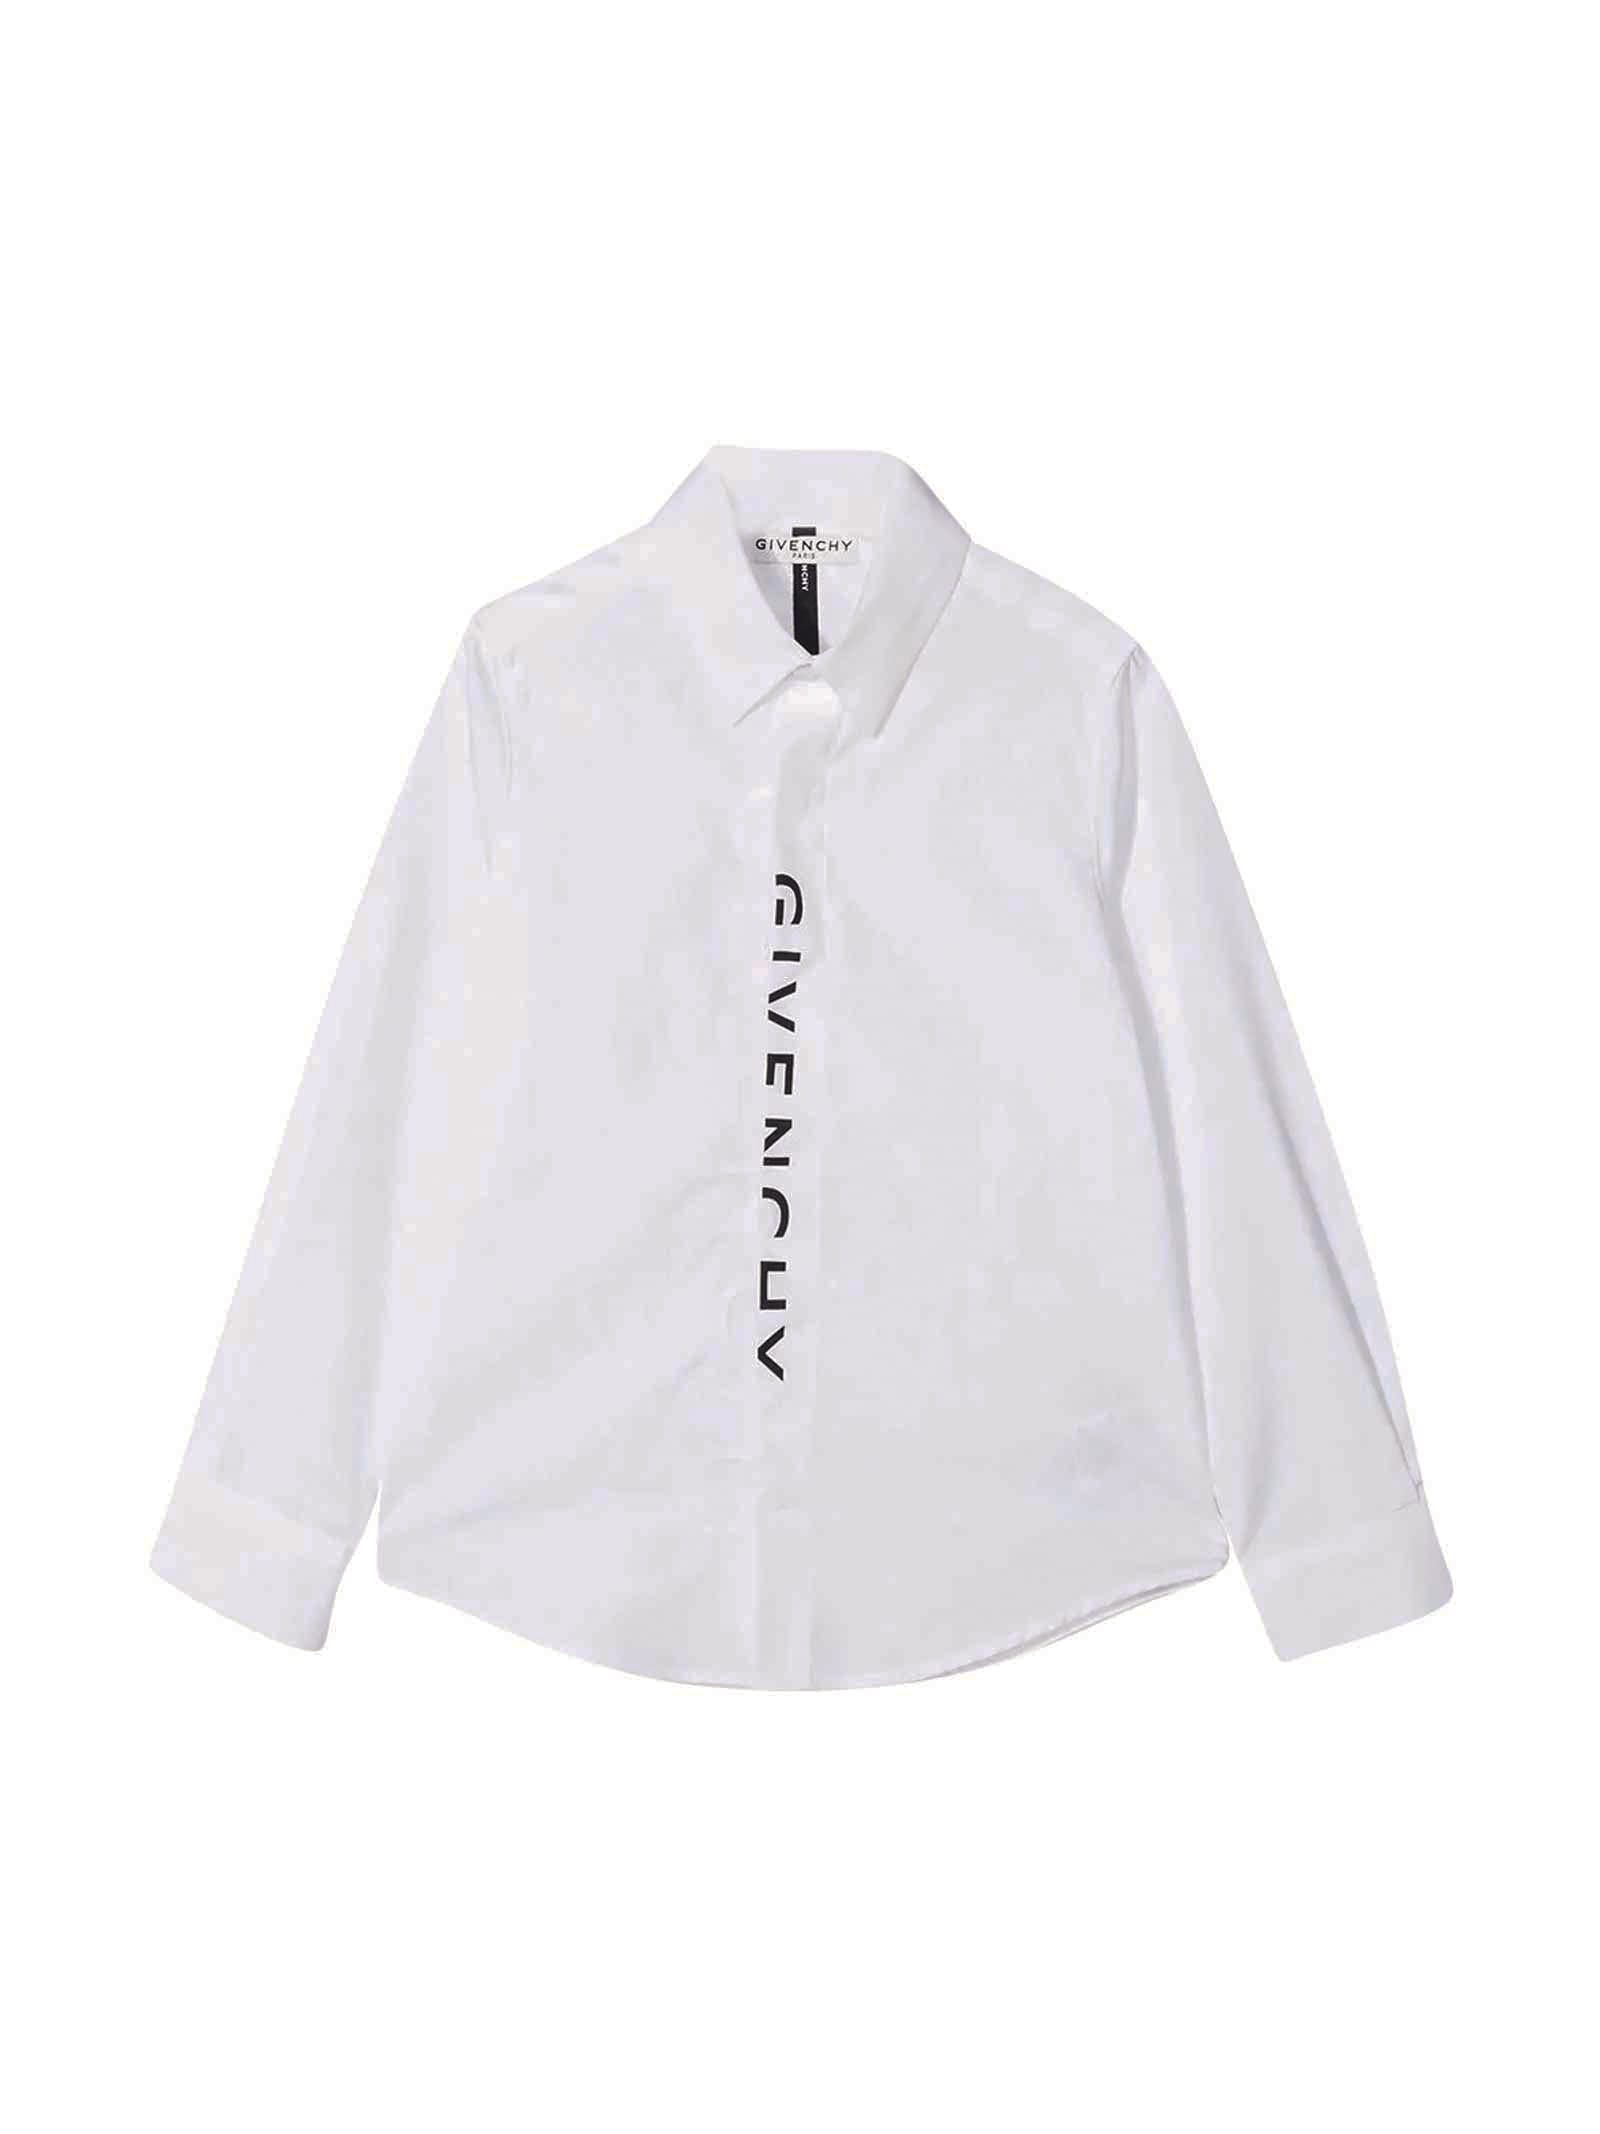 Givenchy Kids' White Shirt With Print In Bianca